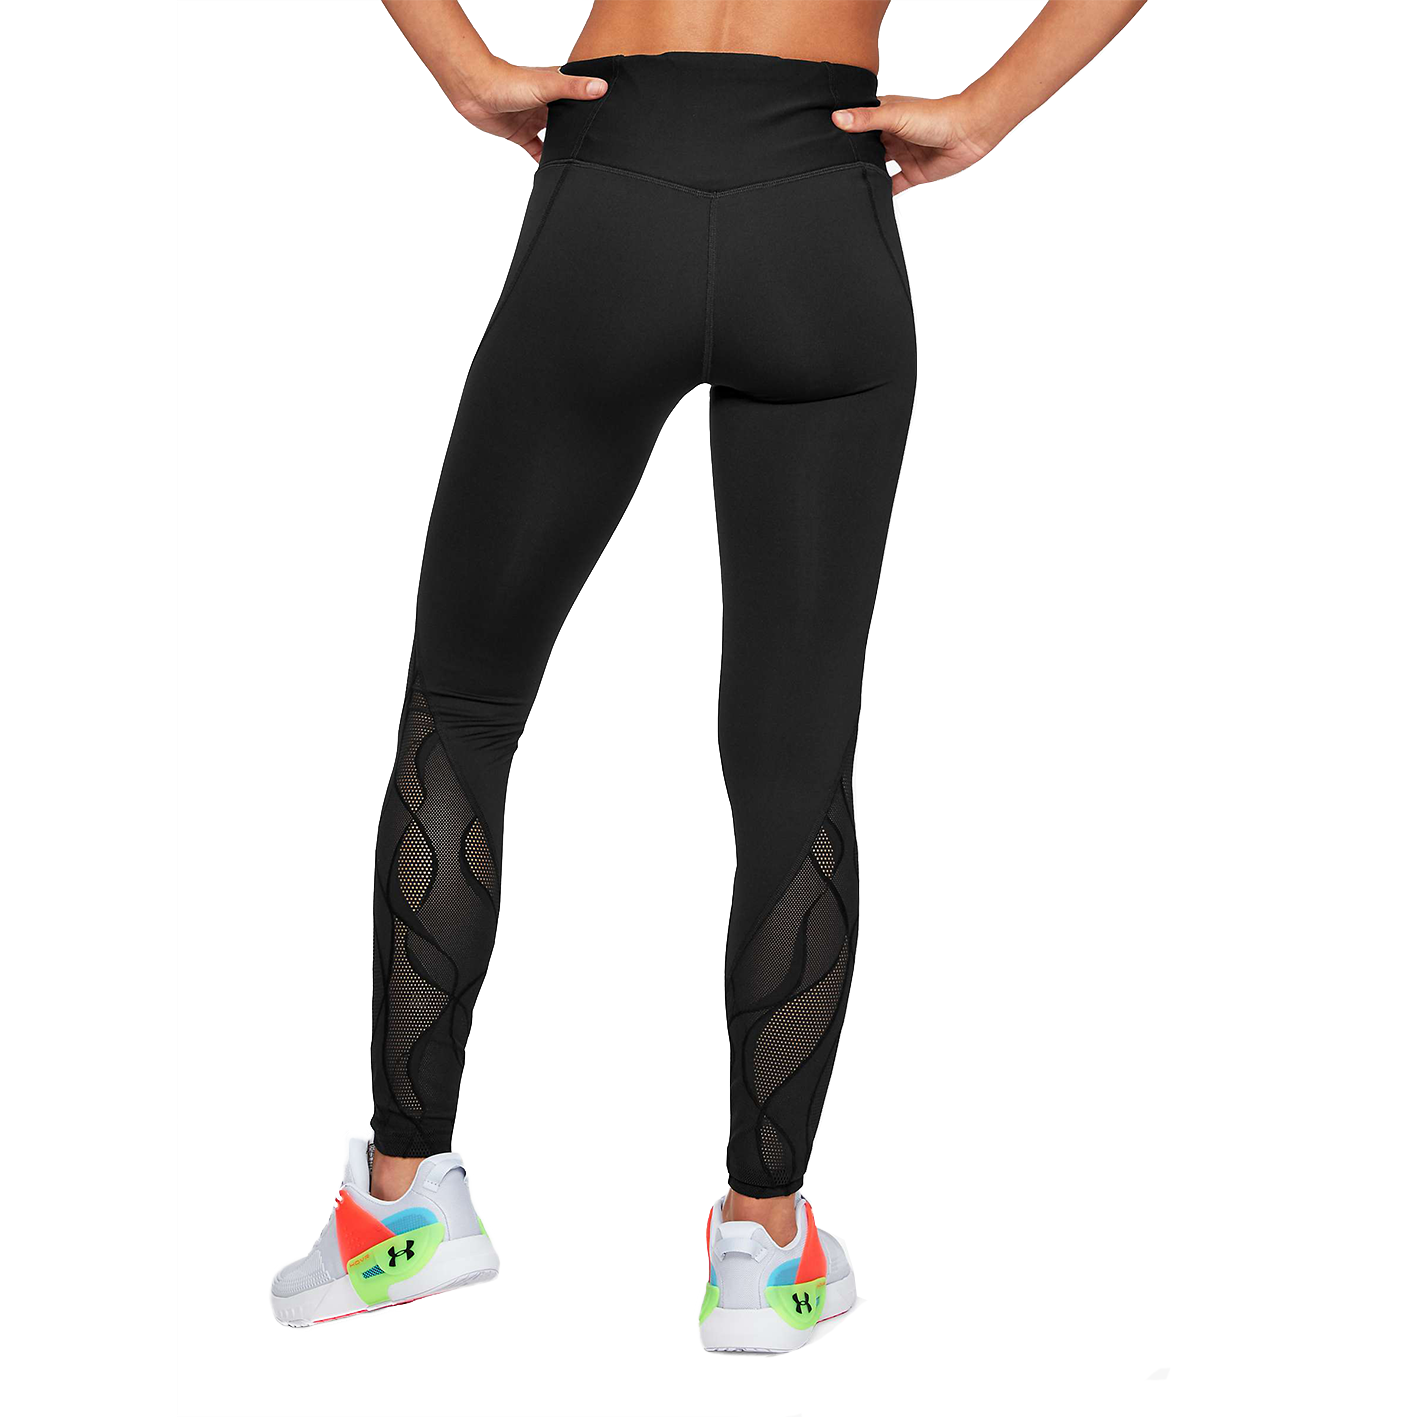 16 Best Gym Leggings With Pockets 